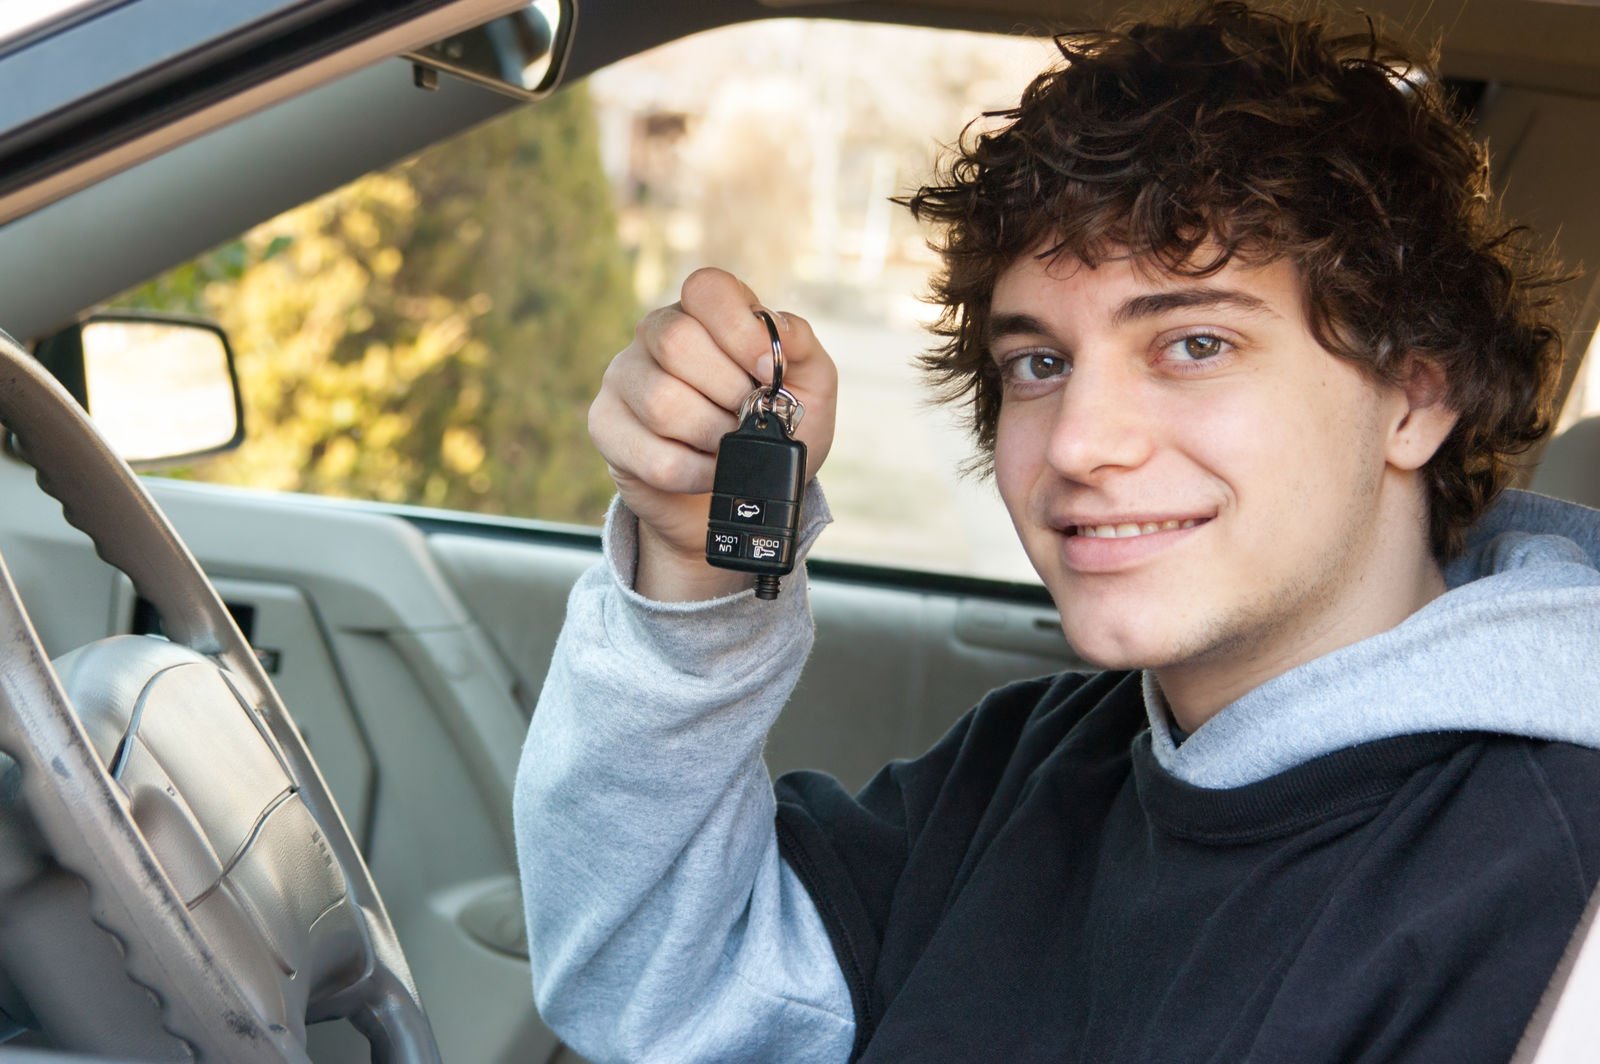 How the Car Affects Teen Auto Insurance Rates